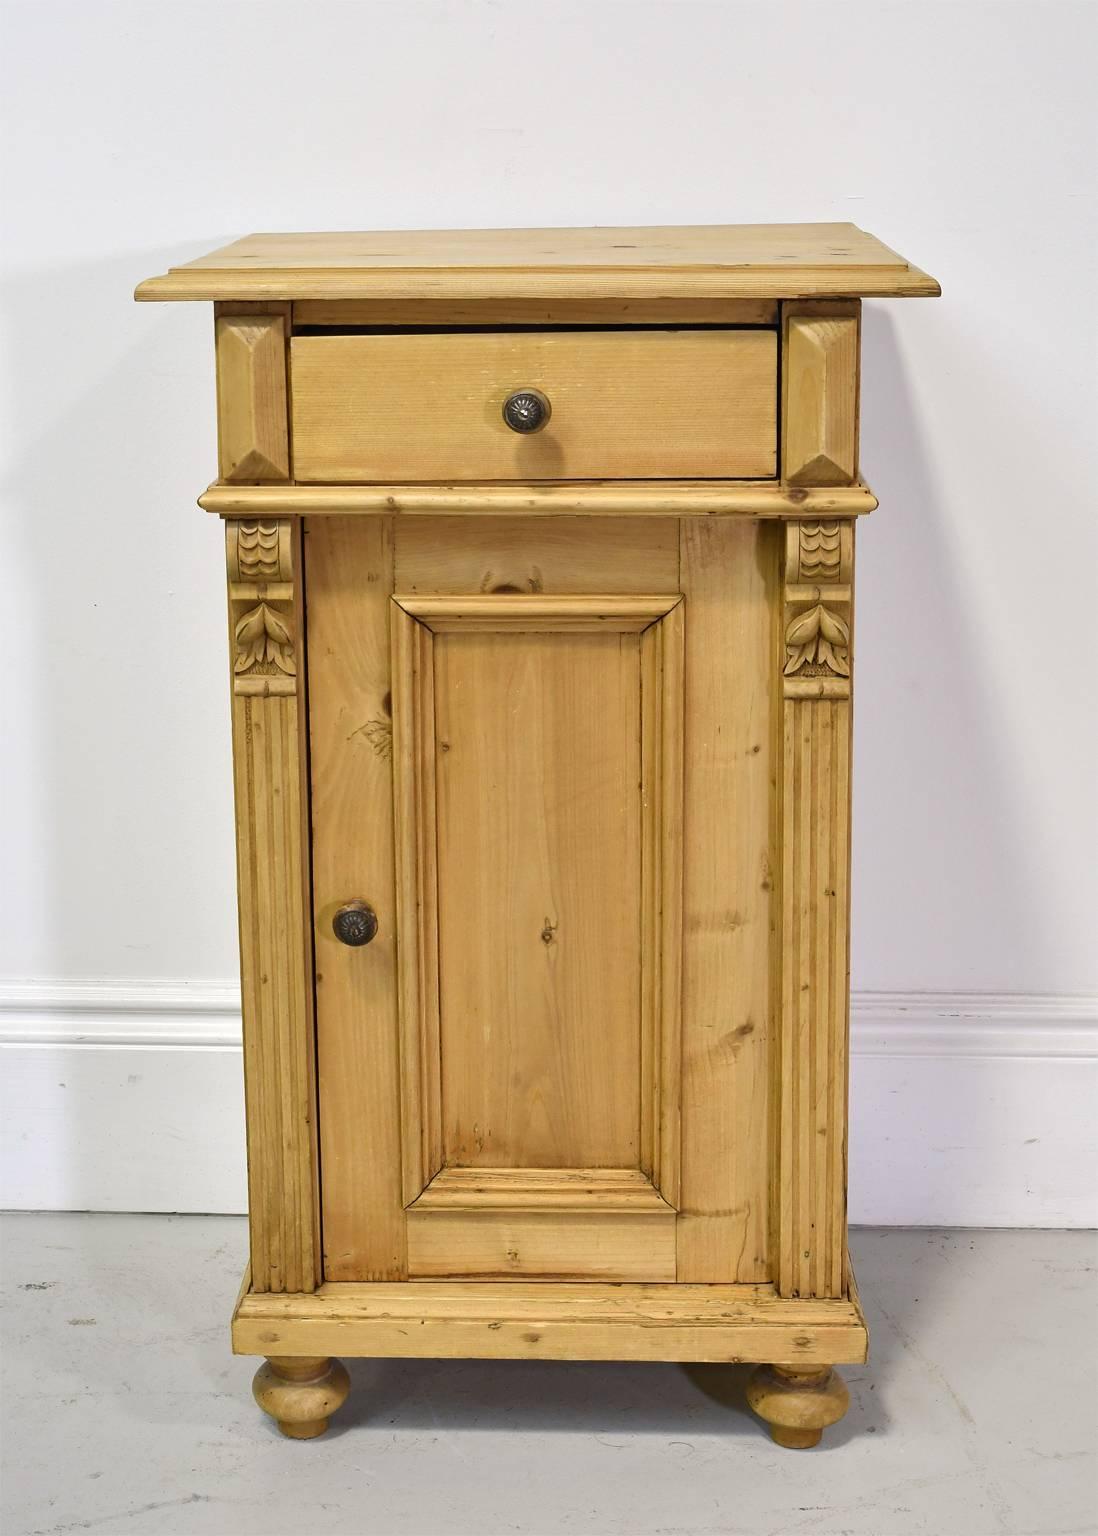 A very lovely small nightstand in pine with carved and geometric appliques, fluted pilasters on the sides, with a single drawer and paneled cabinet door, resting on turned bun feet, German, circa 1870. Original turned wooden knobs.

19" wide x